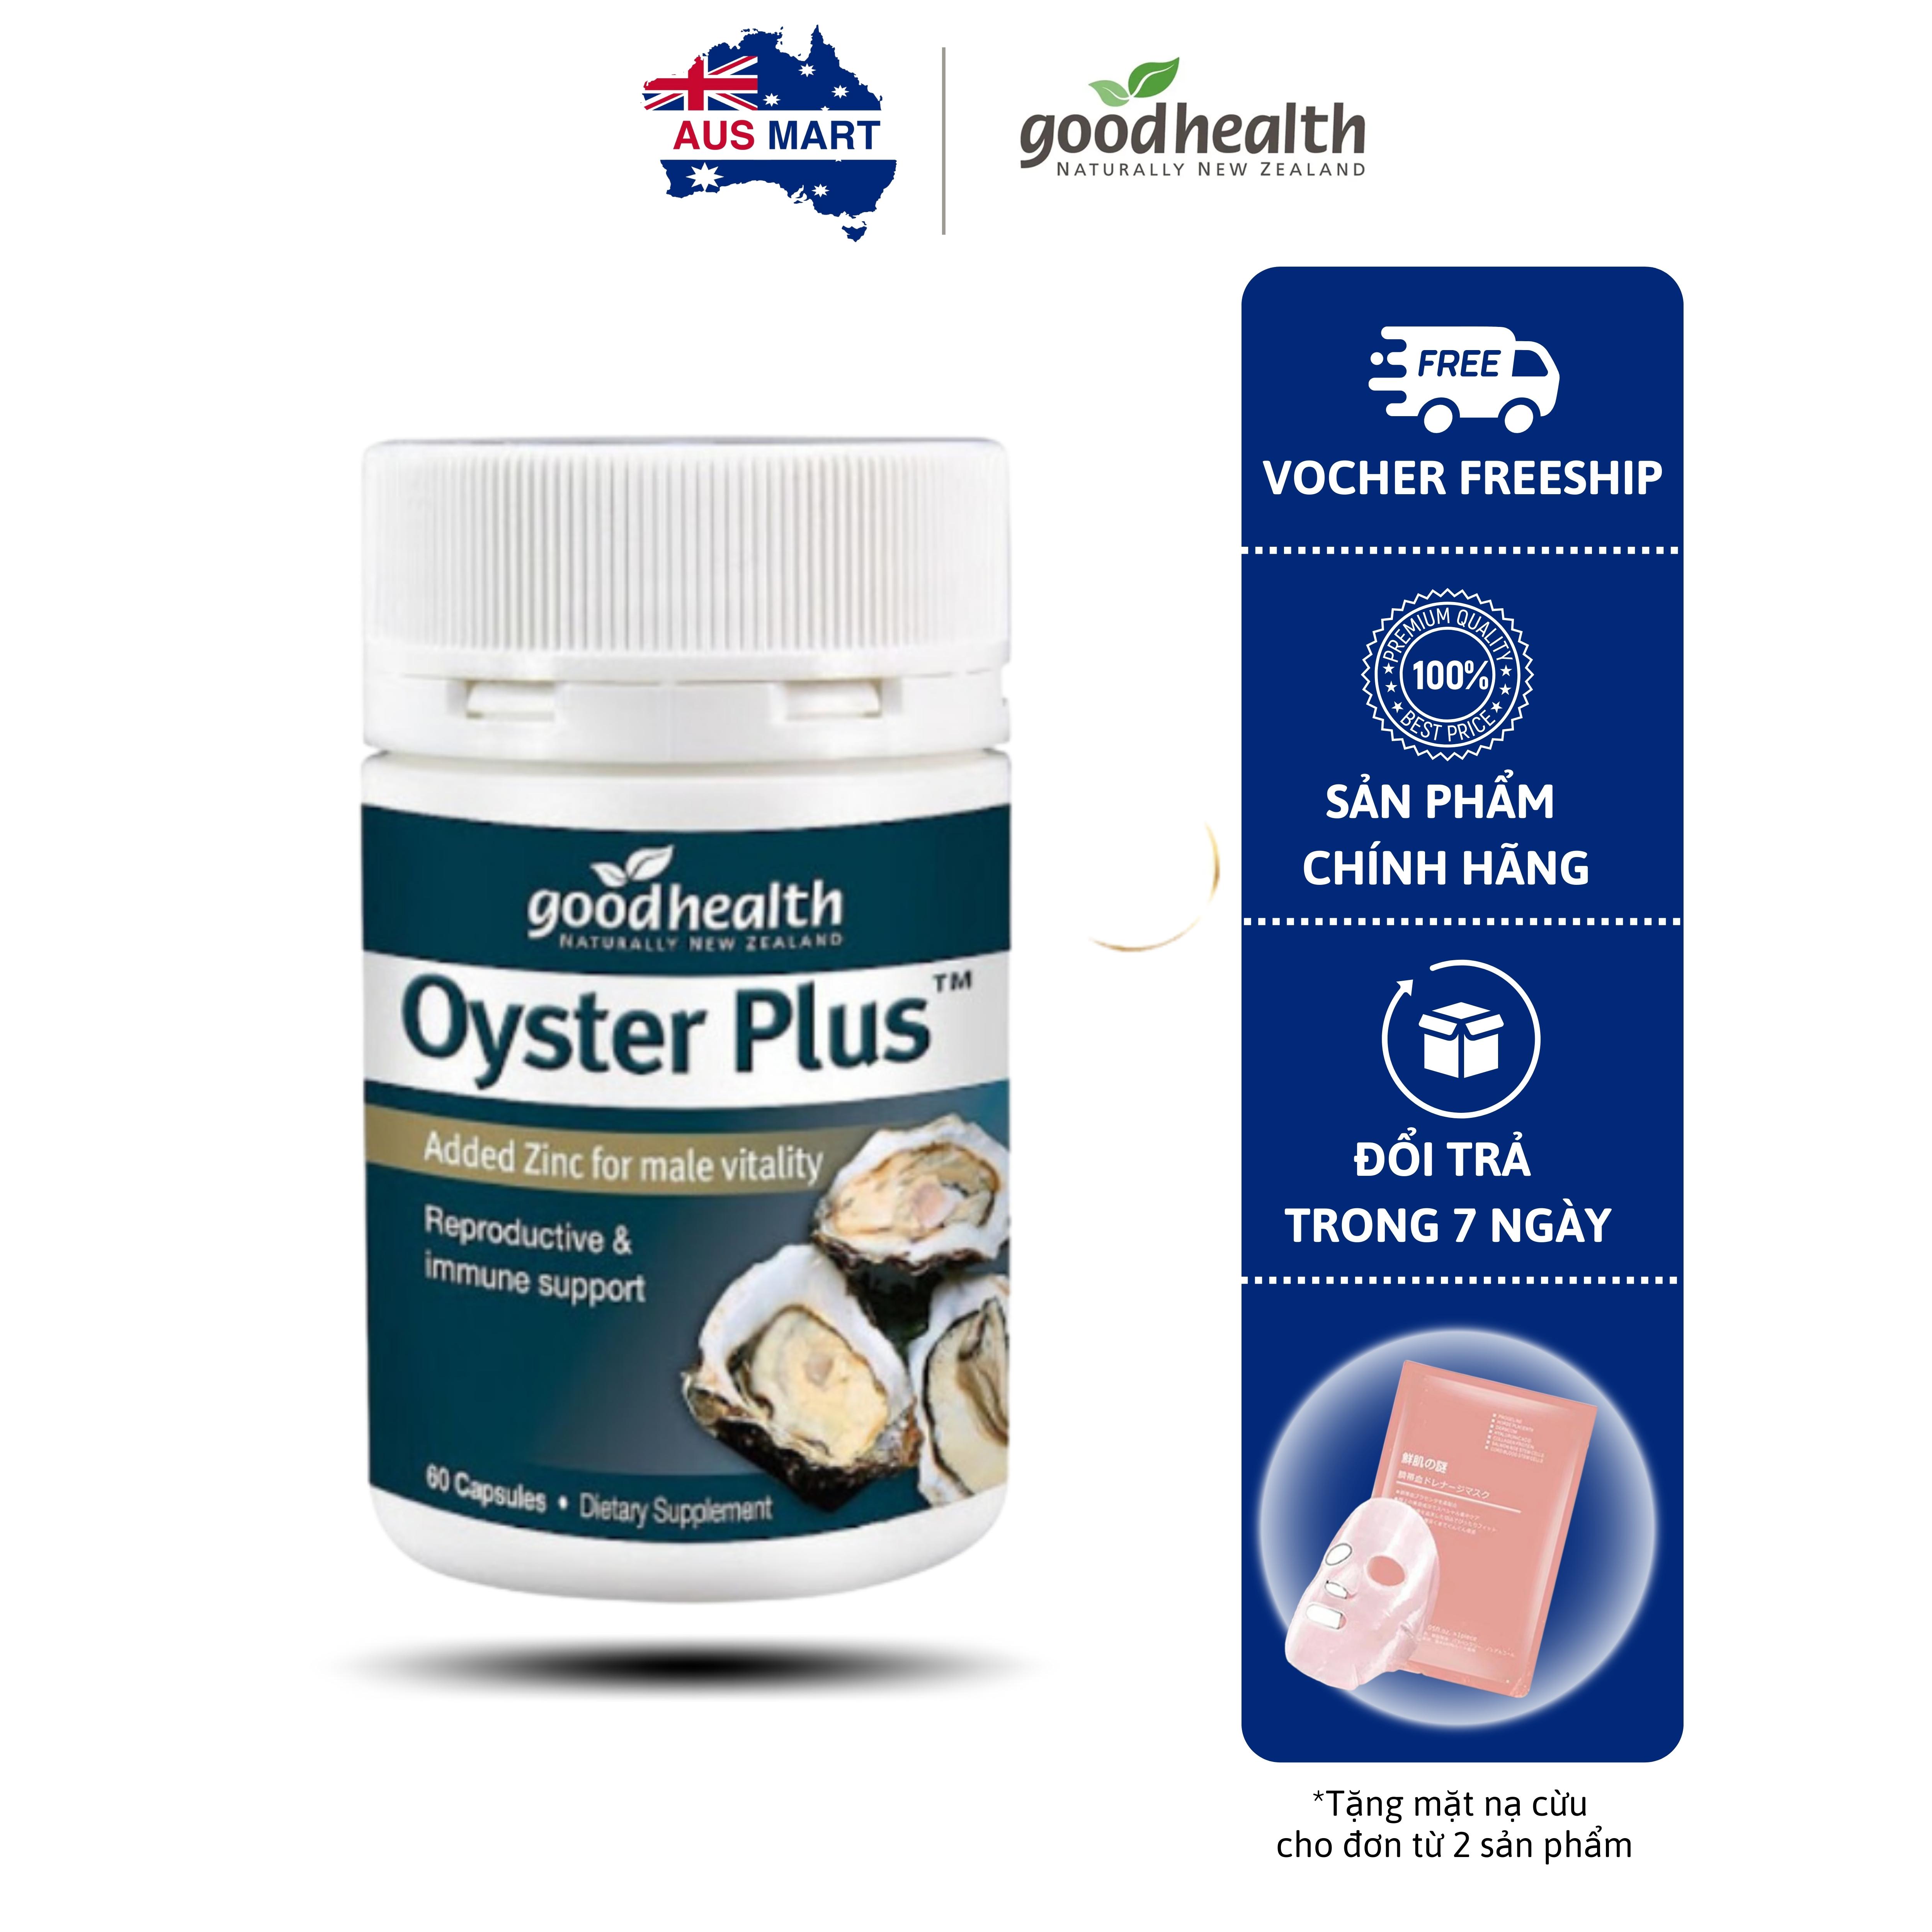 Good Health Oyster Plus oyster extract, Australia 60 tablets enhances male